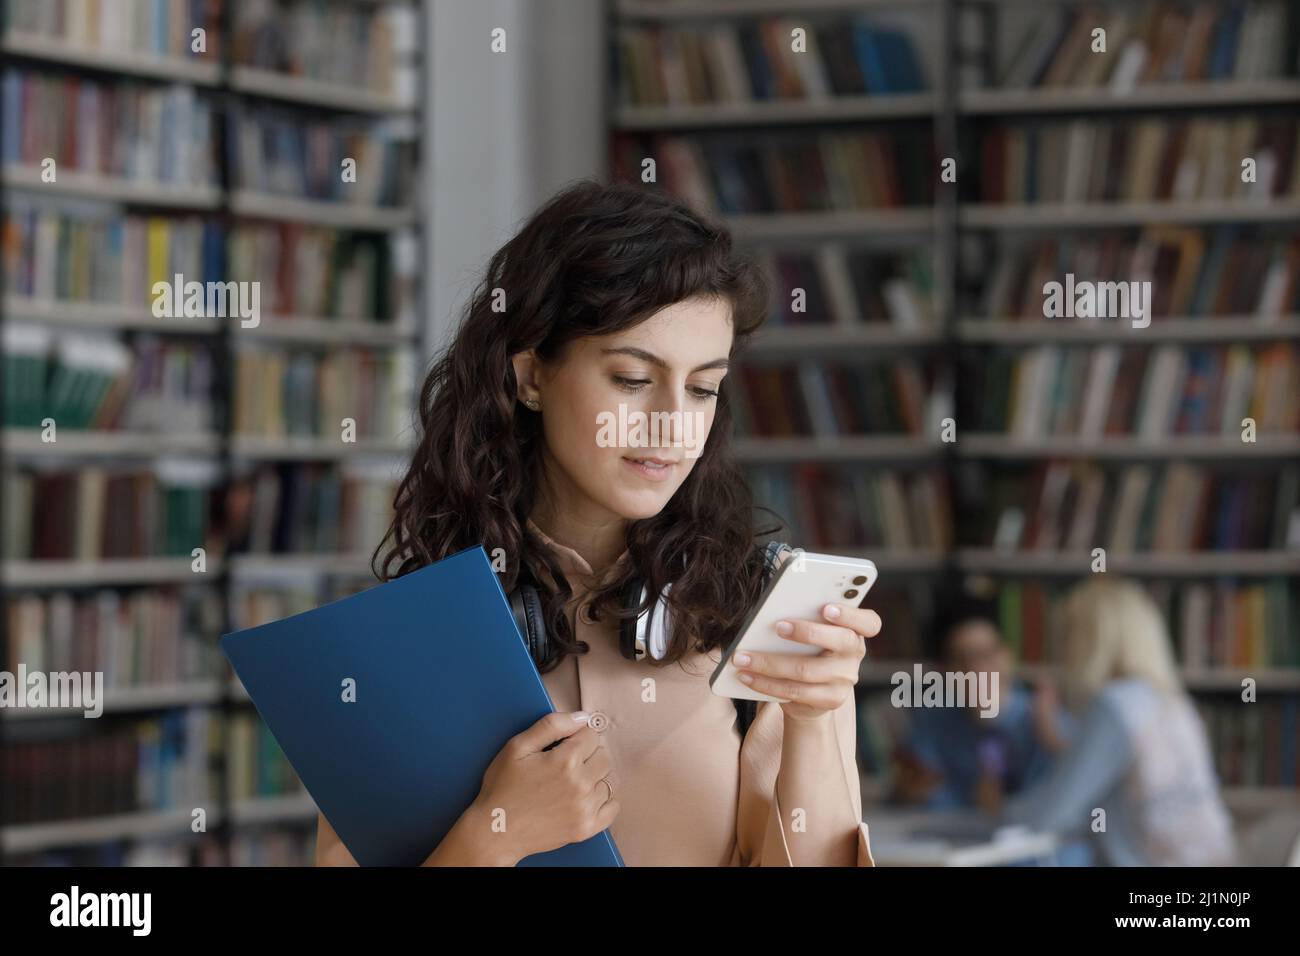 Student girl using smartphone standing in library Stock Photo